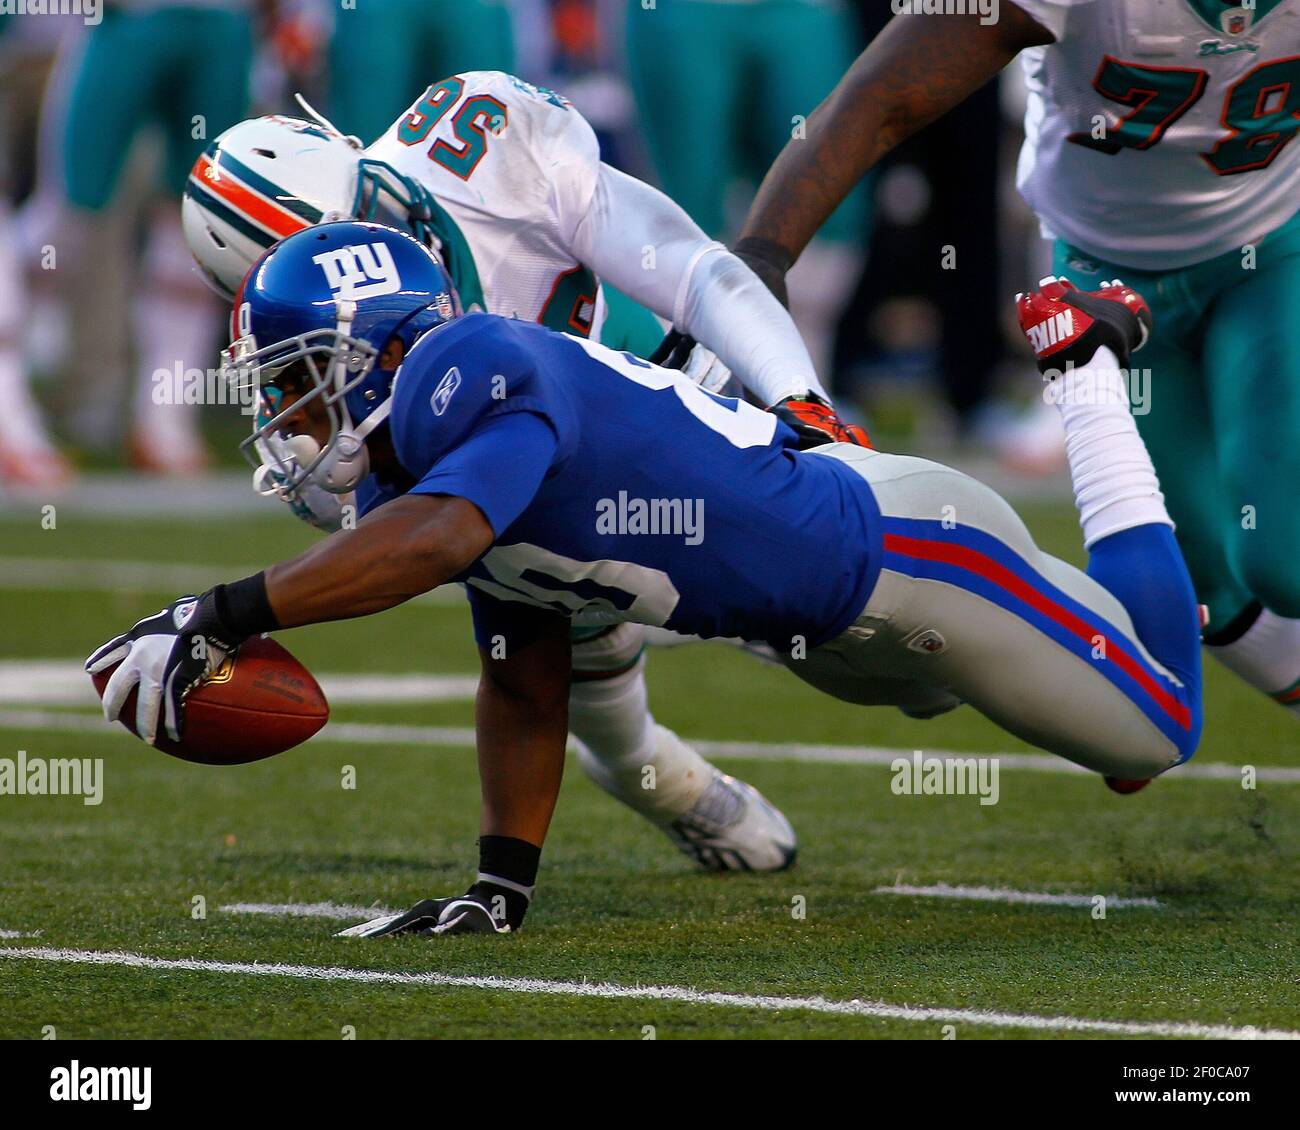 New York Giants' Victor Cruz stretches for a first down against Miami  Dolphins' Kevin Burnett in the fourth quarter. The New York Giants defeated  the Miami Dolphins, 20-17, at MetLife Stadium in